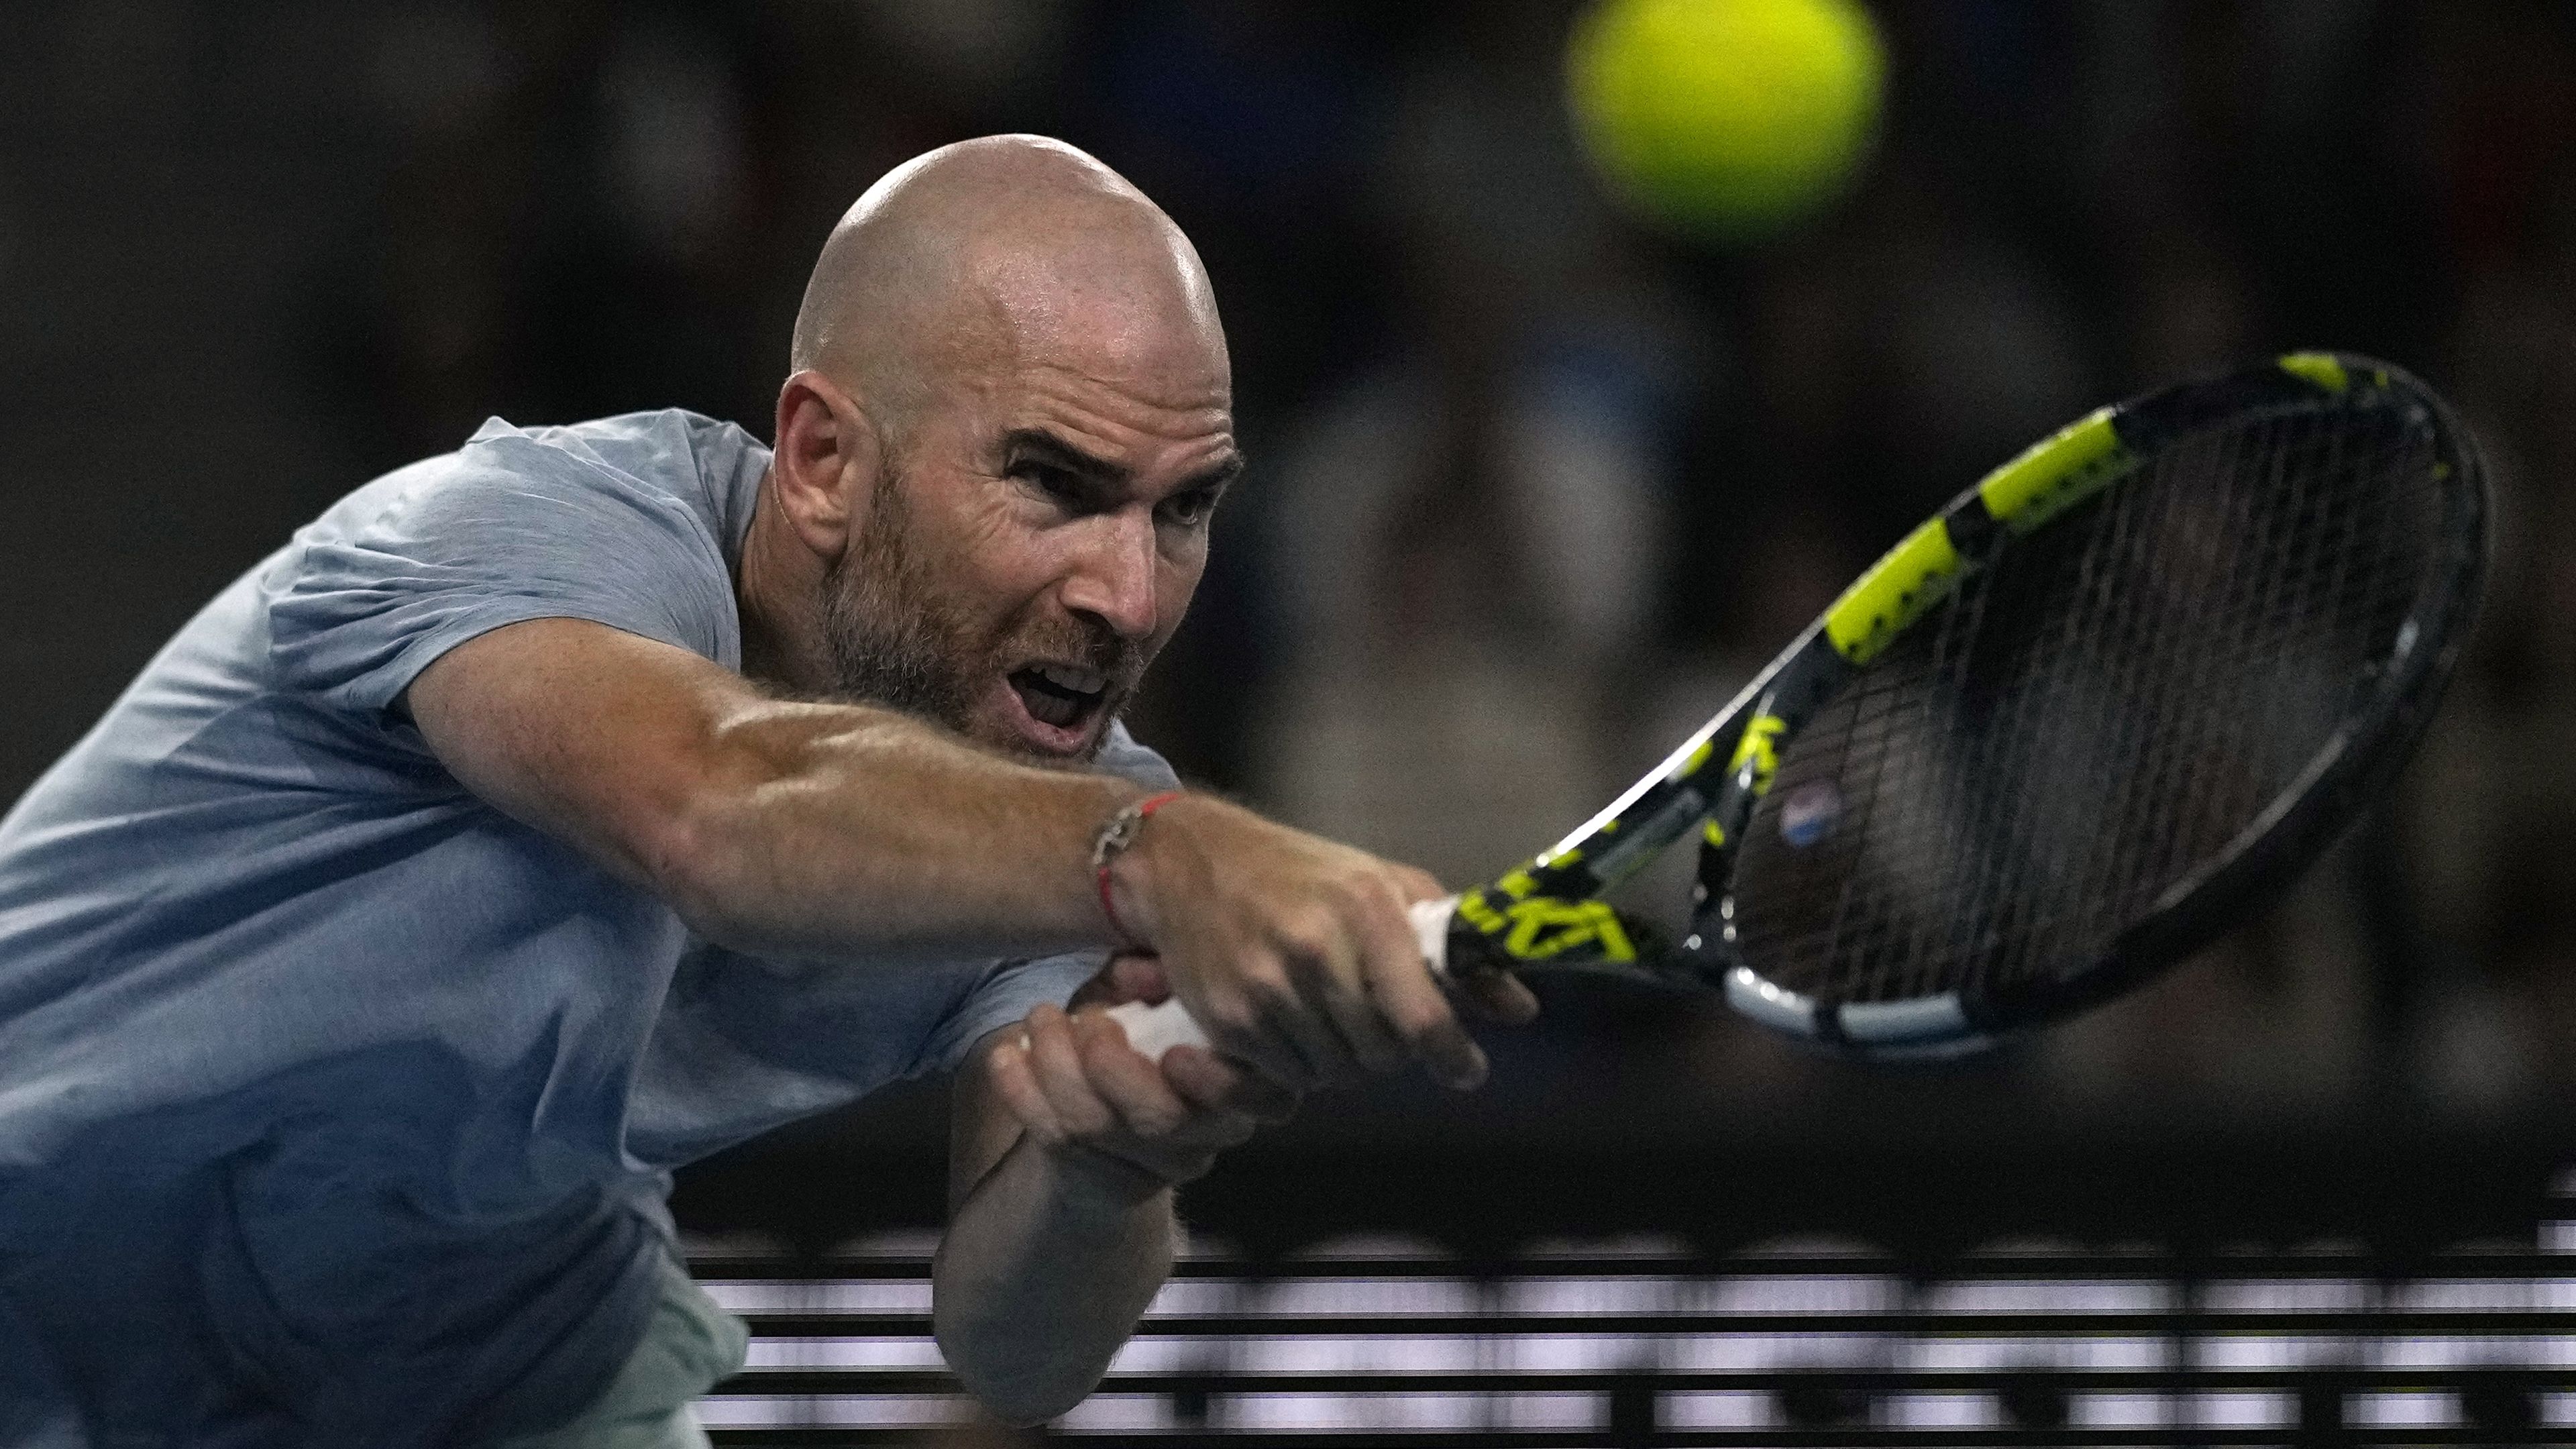 Adrian Mannarino of France plays a forehand return to Ben Shelton of the U.S. during their third round match at the Australian Open.